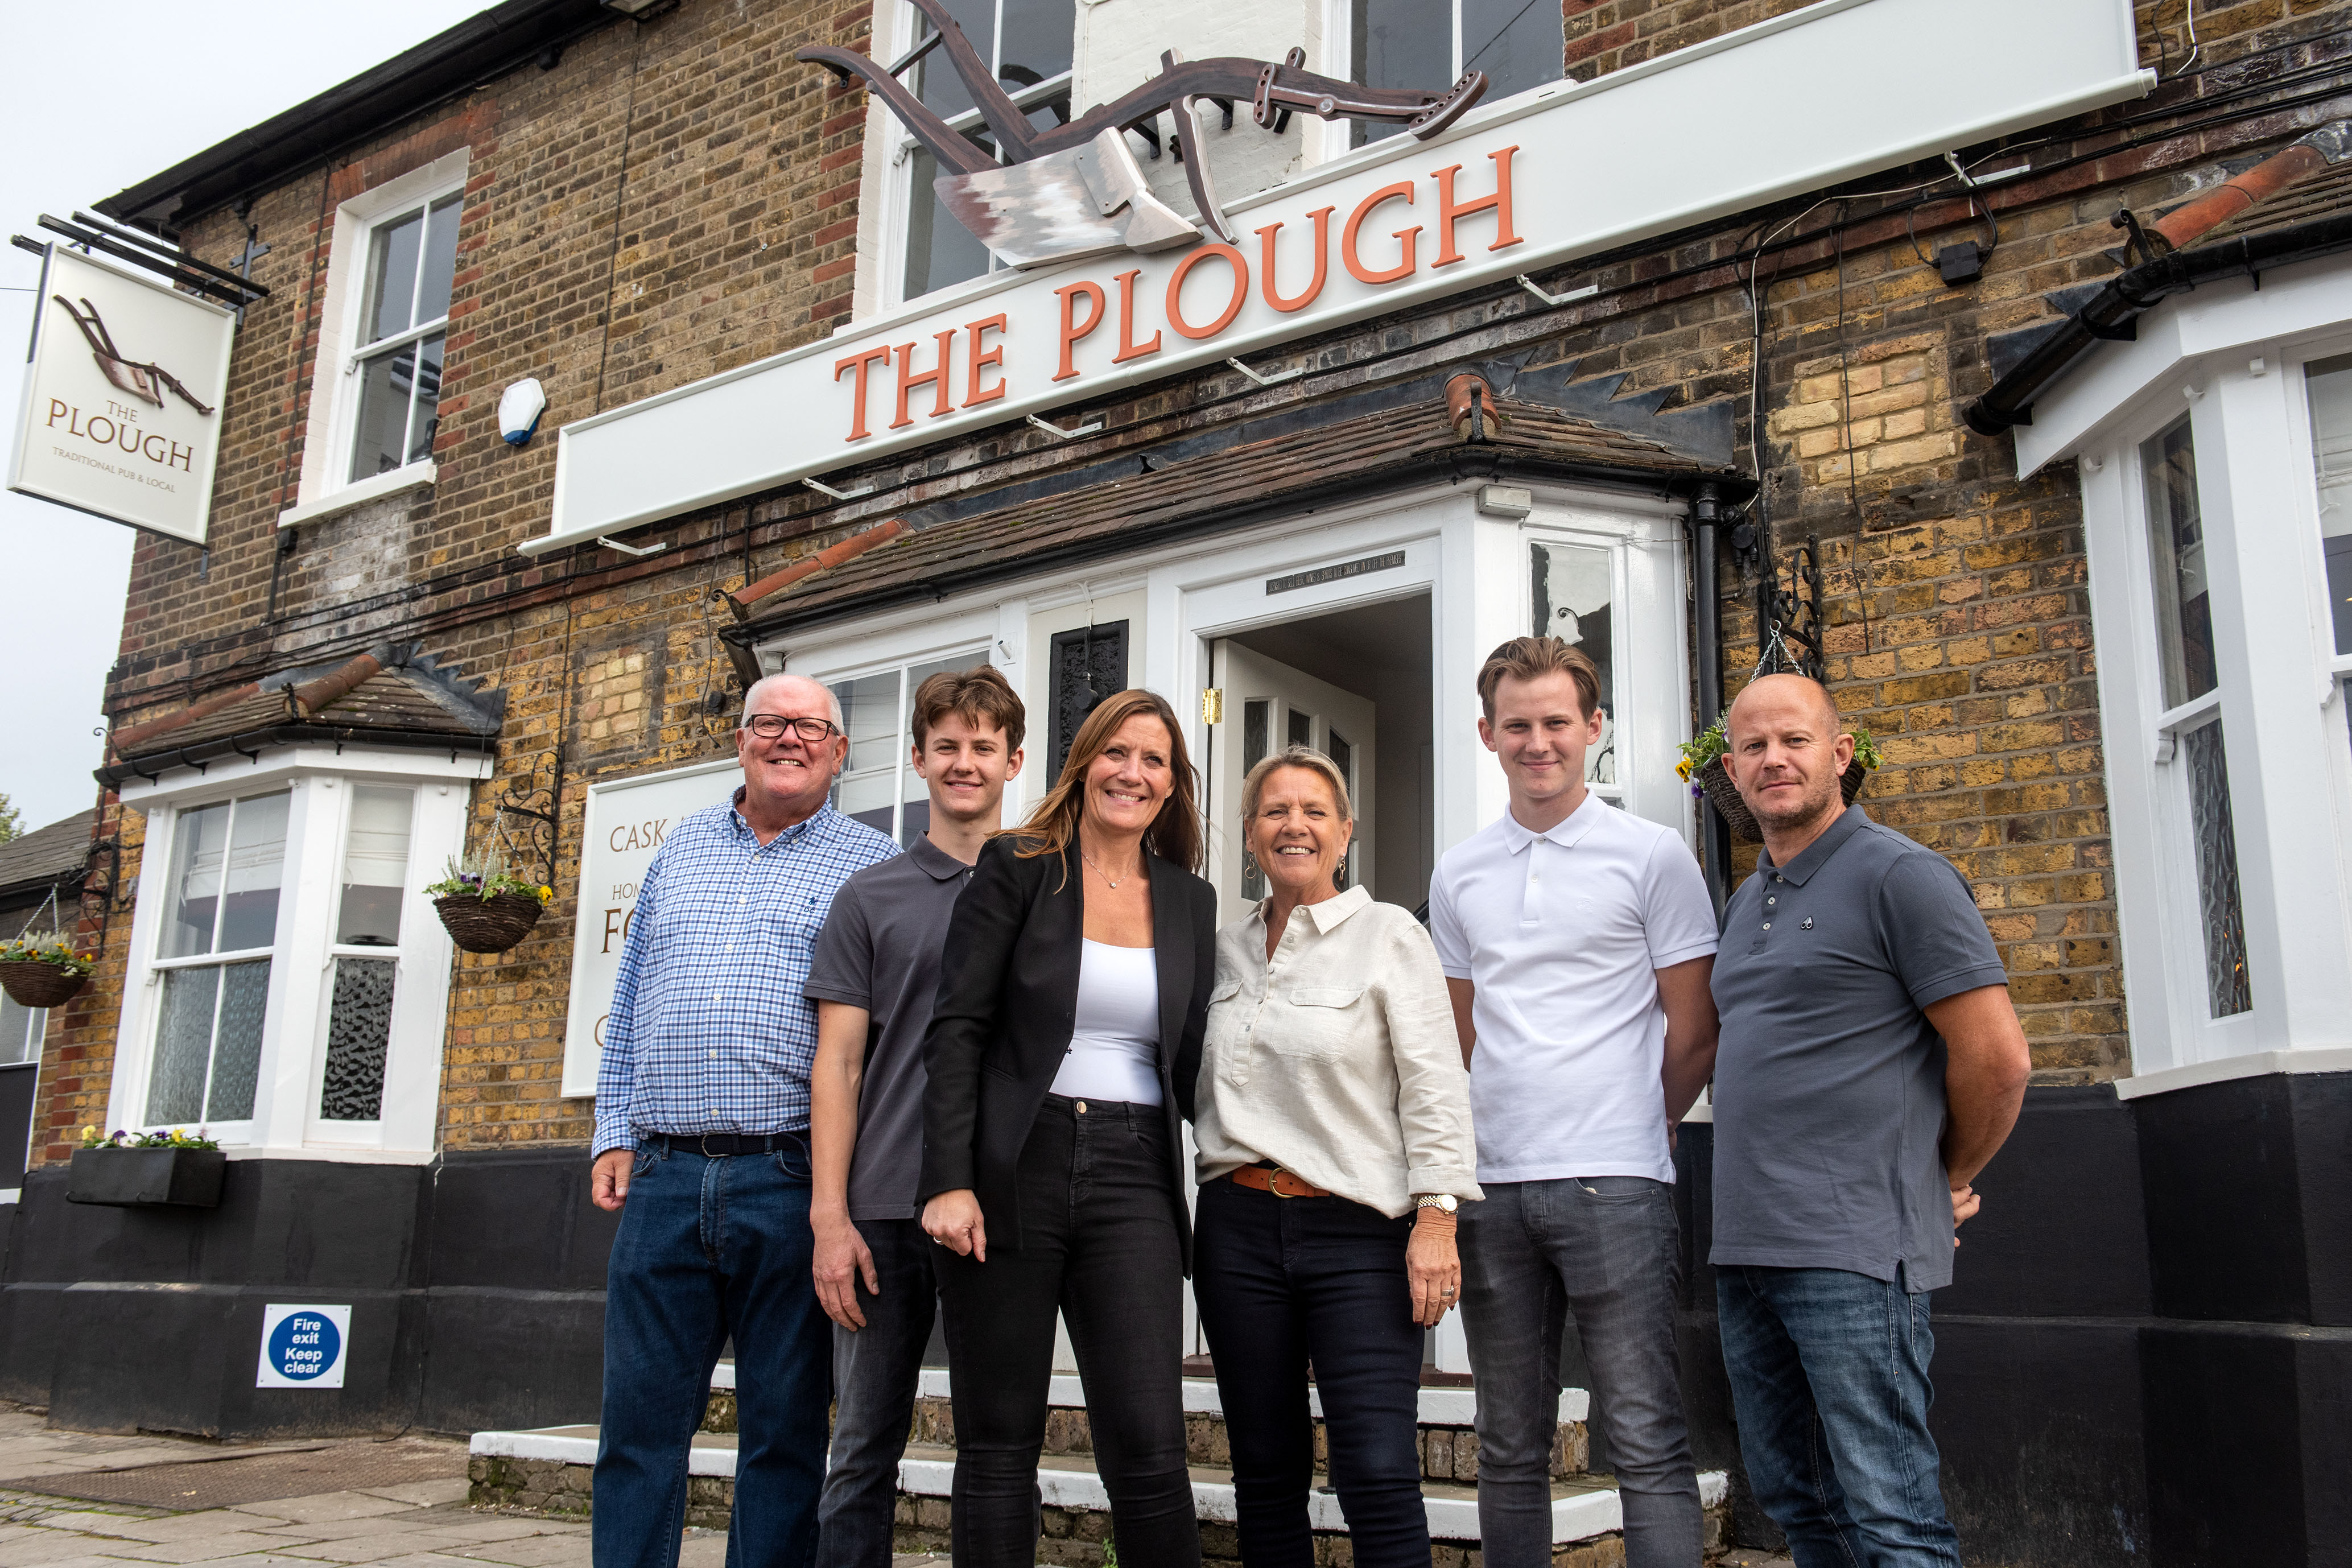 It's a hat trick! Dartford family opens their third local pub following major revamp